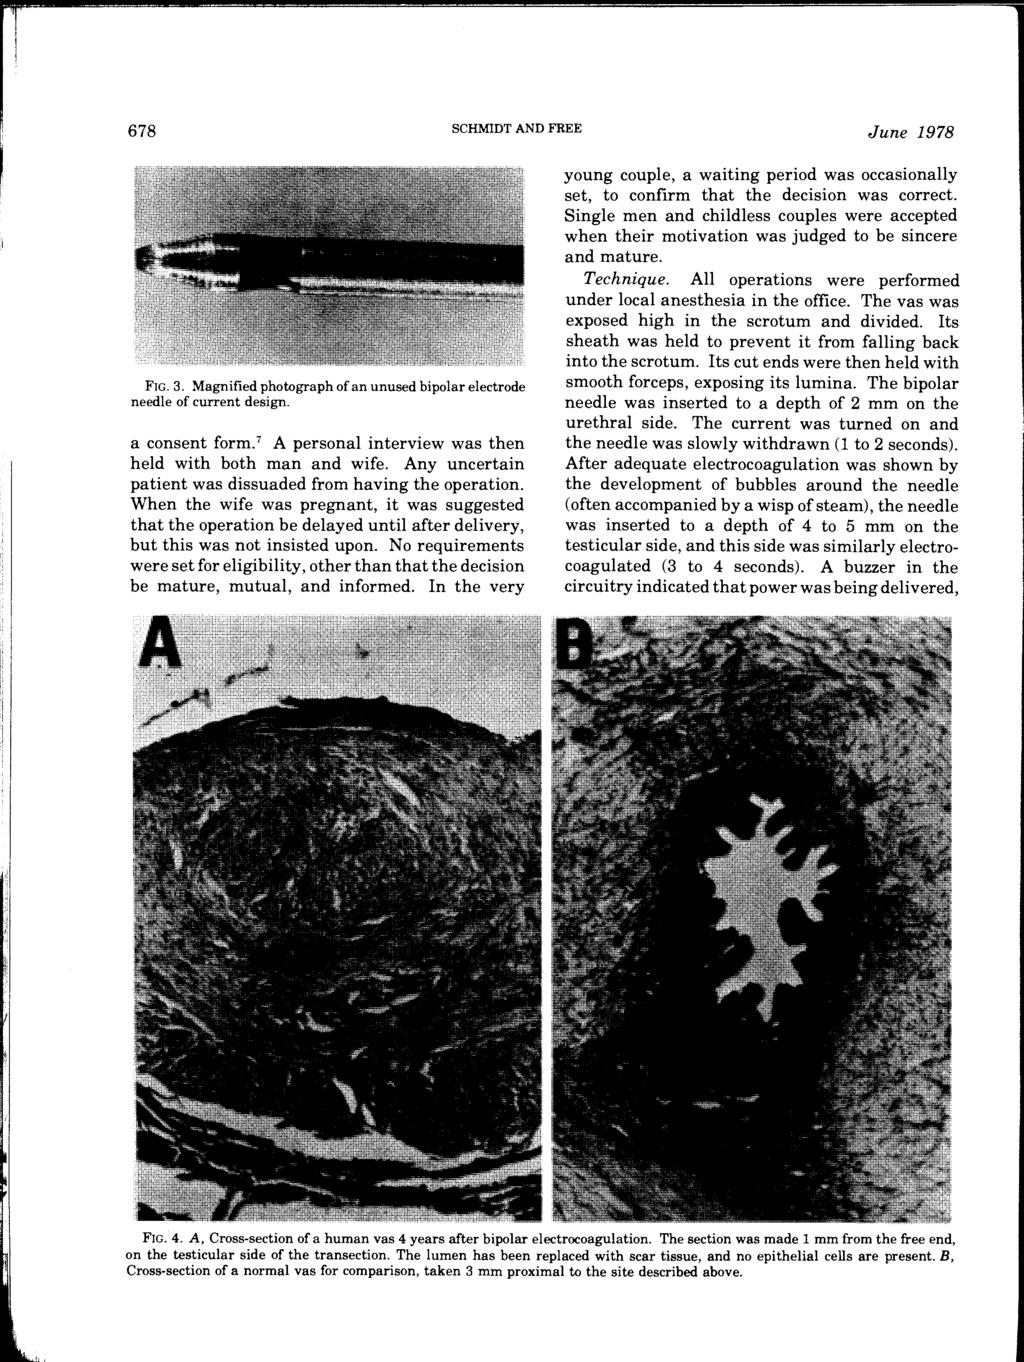 678 SCHMIDT AND FREE June 1978 FIG. 3. Magnified photograph of an unused bipolar electrode needle of current design. a consent form. 7 A personal interview was then held with both man and wife.